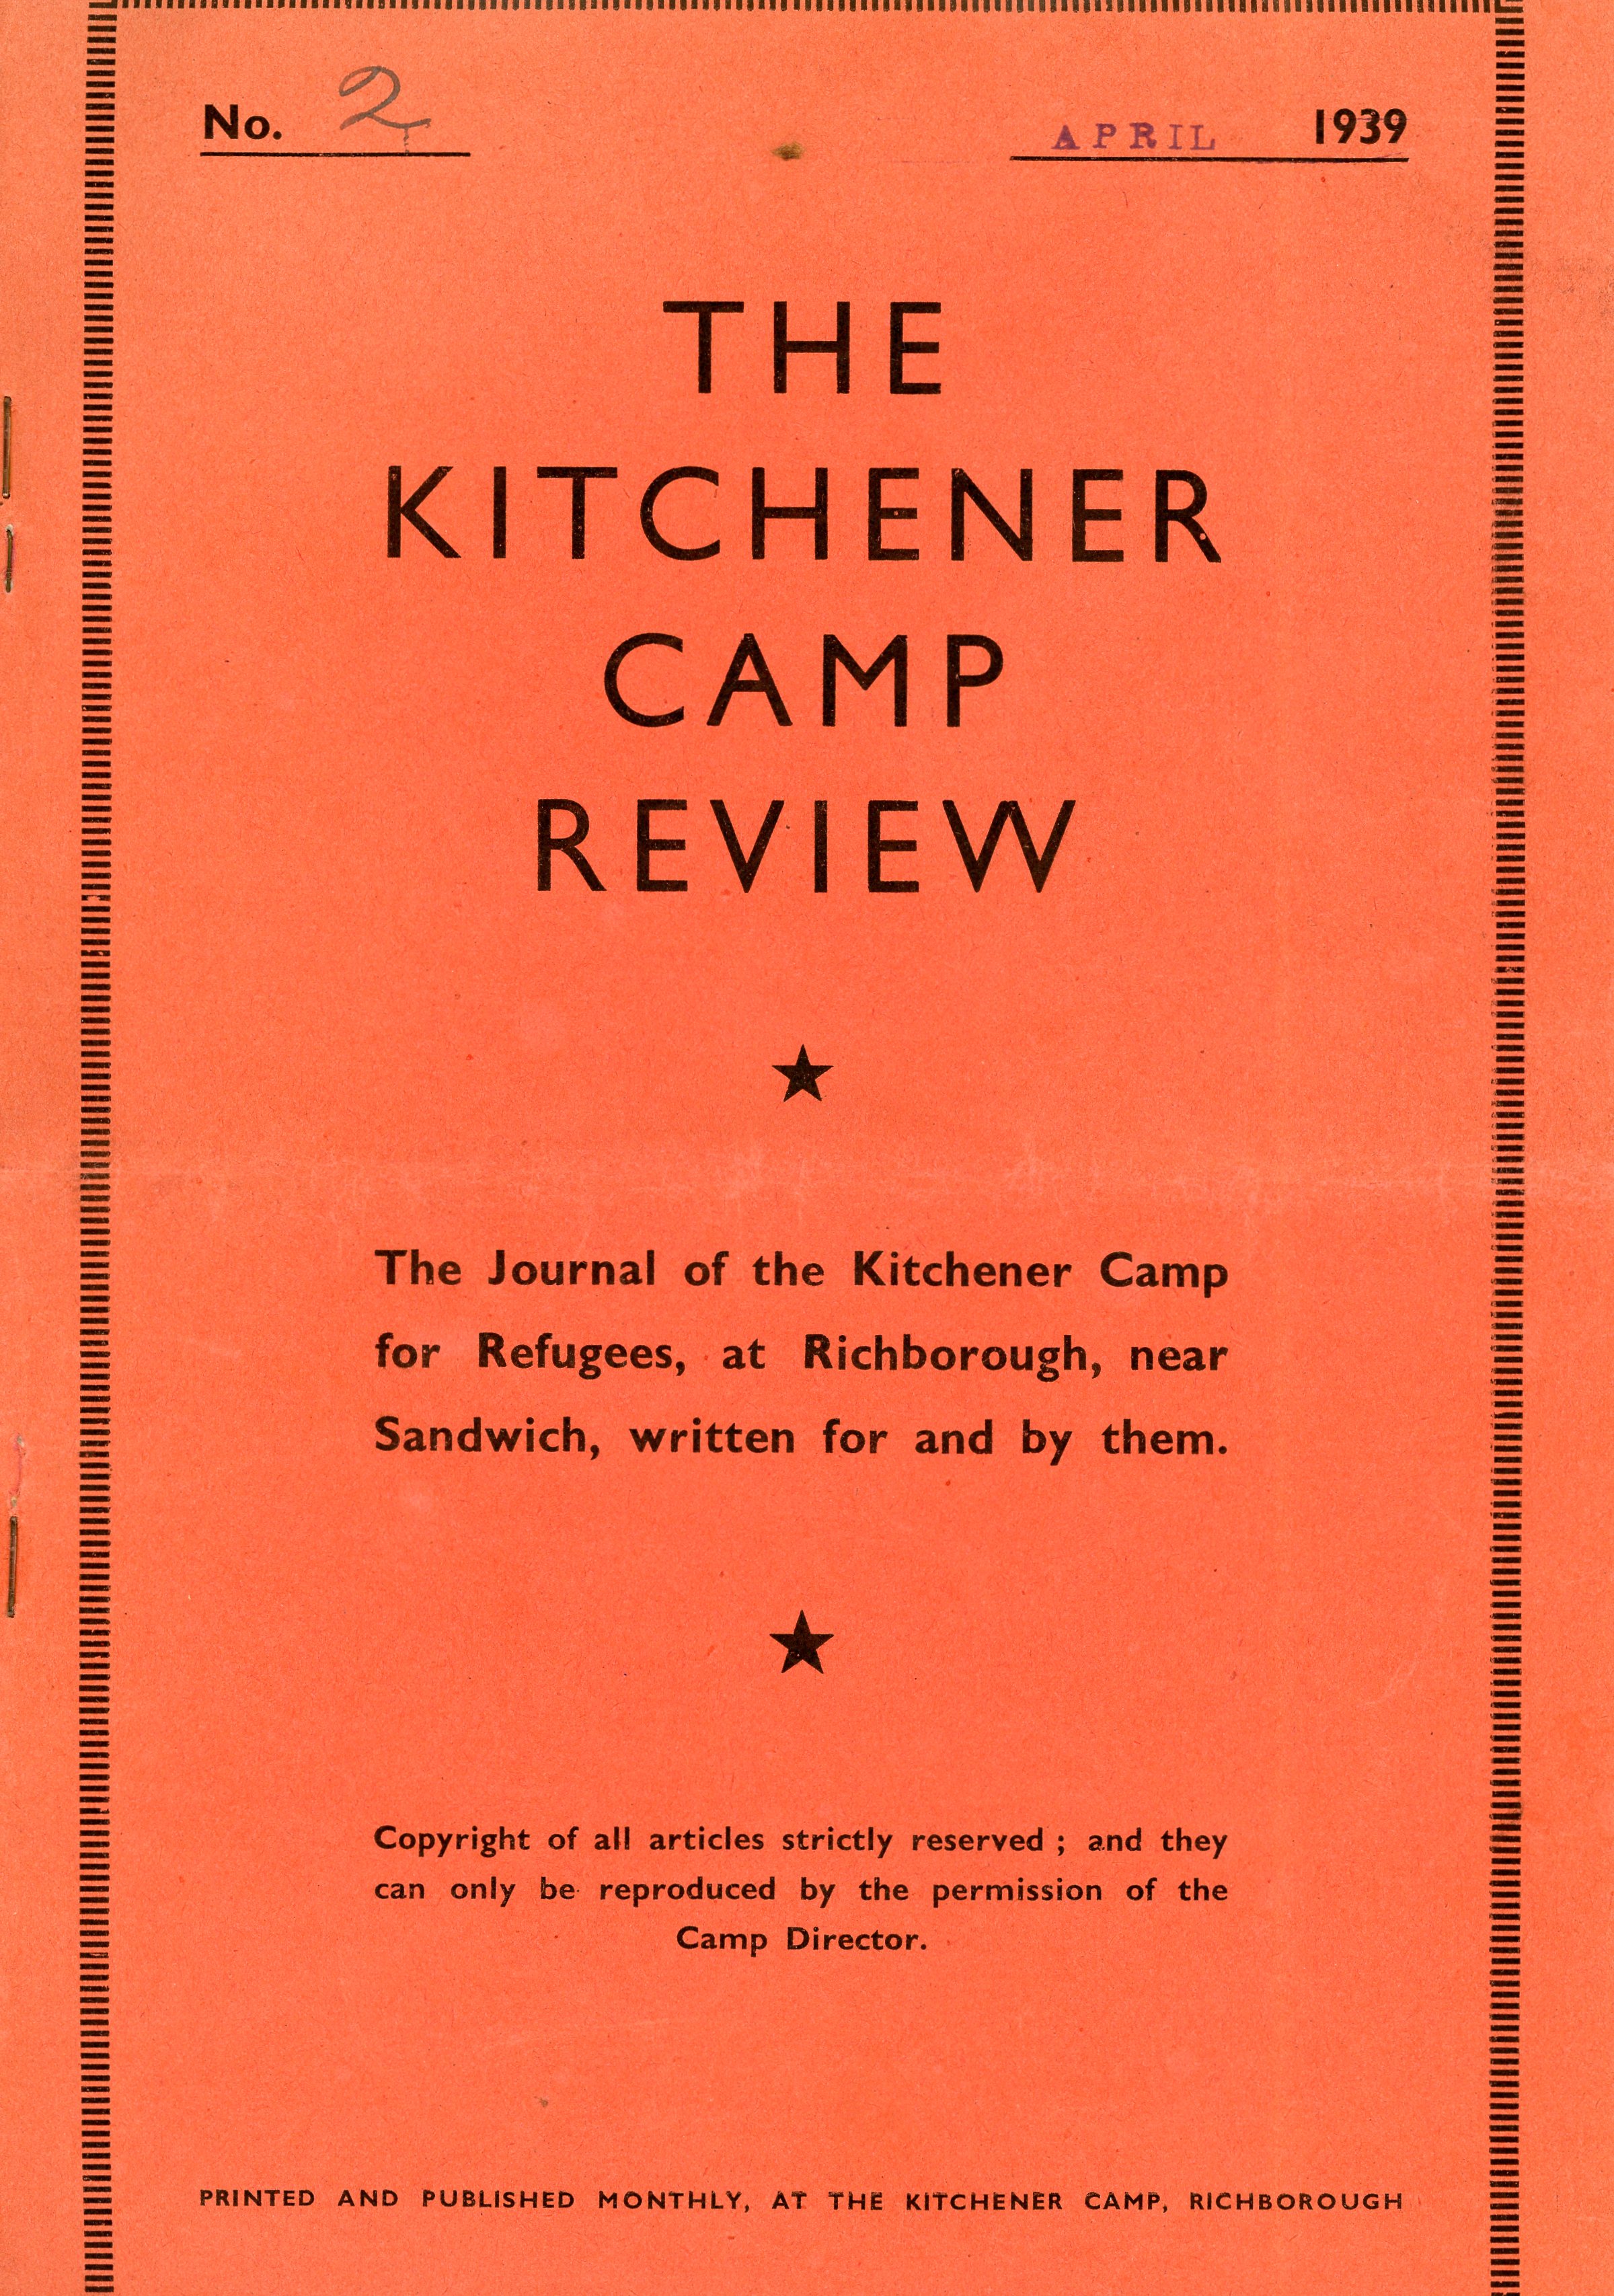 Kitchener Camp Review, April 1939, Front cover